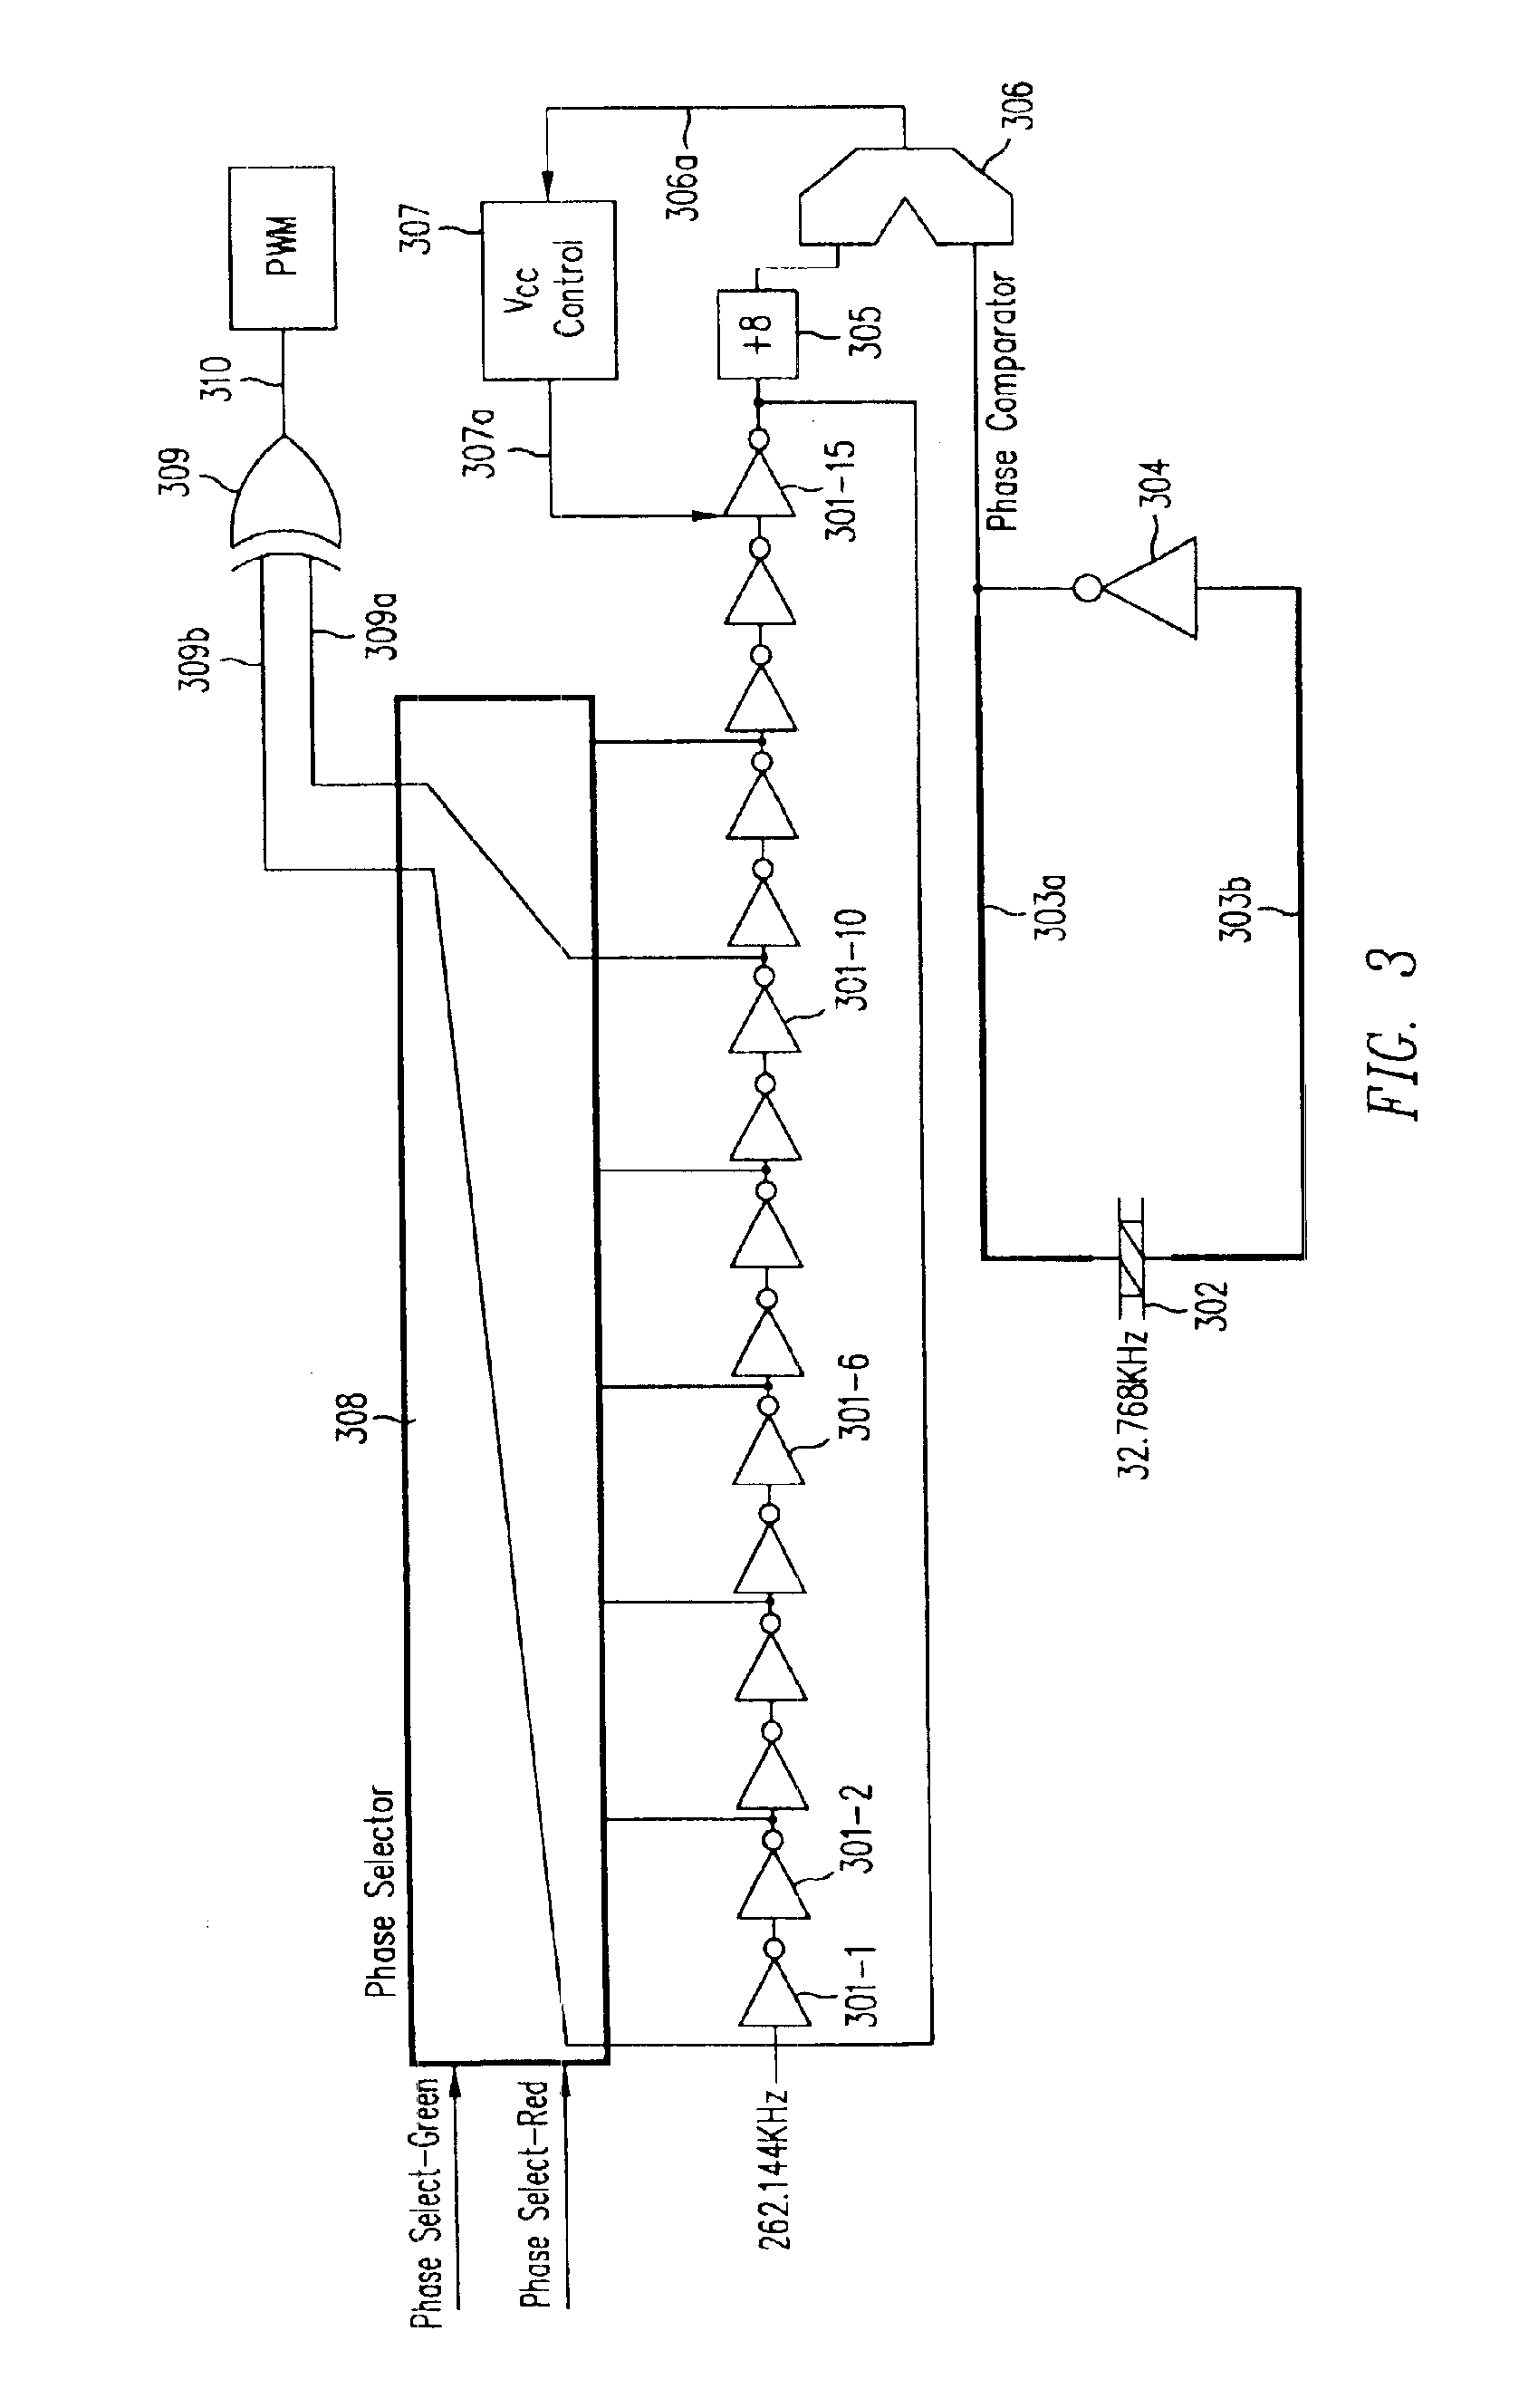 Multi-channel control methods for switched power converters